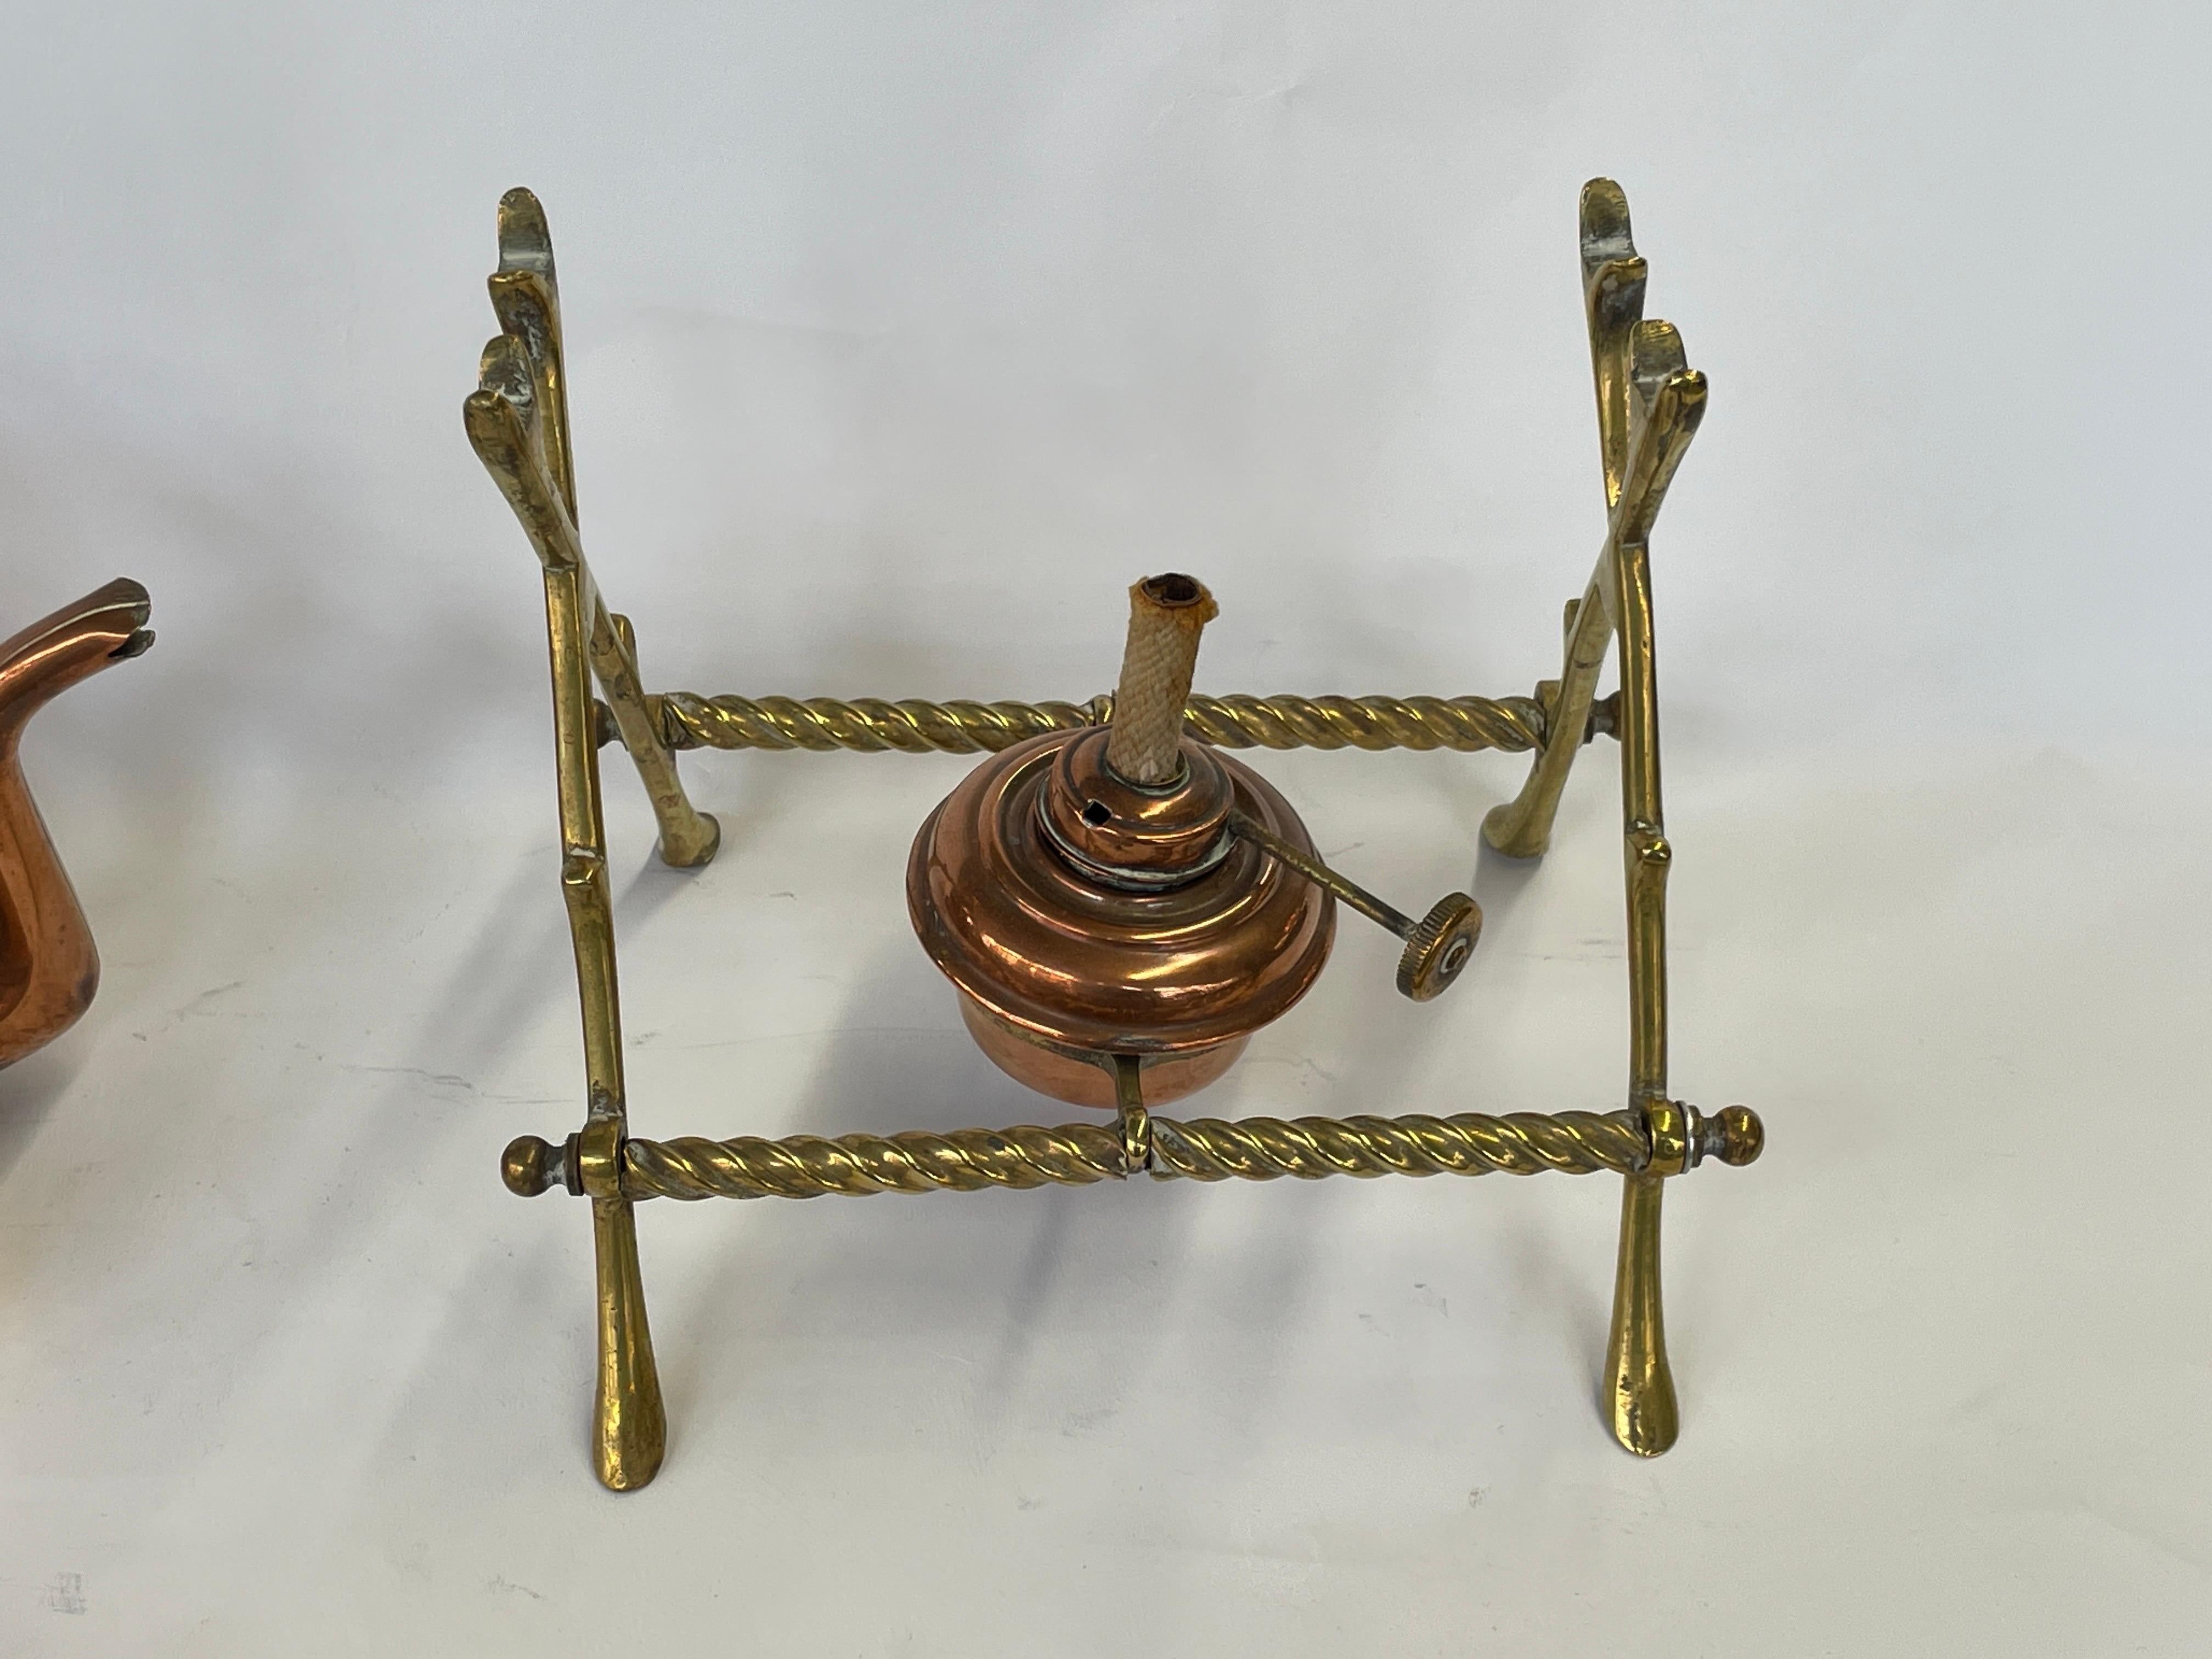 19th Century Rare Antique English Aesthetic Movt. Chased Copper Square Tea Kettle on Stand For Sale